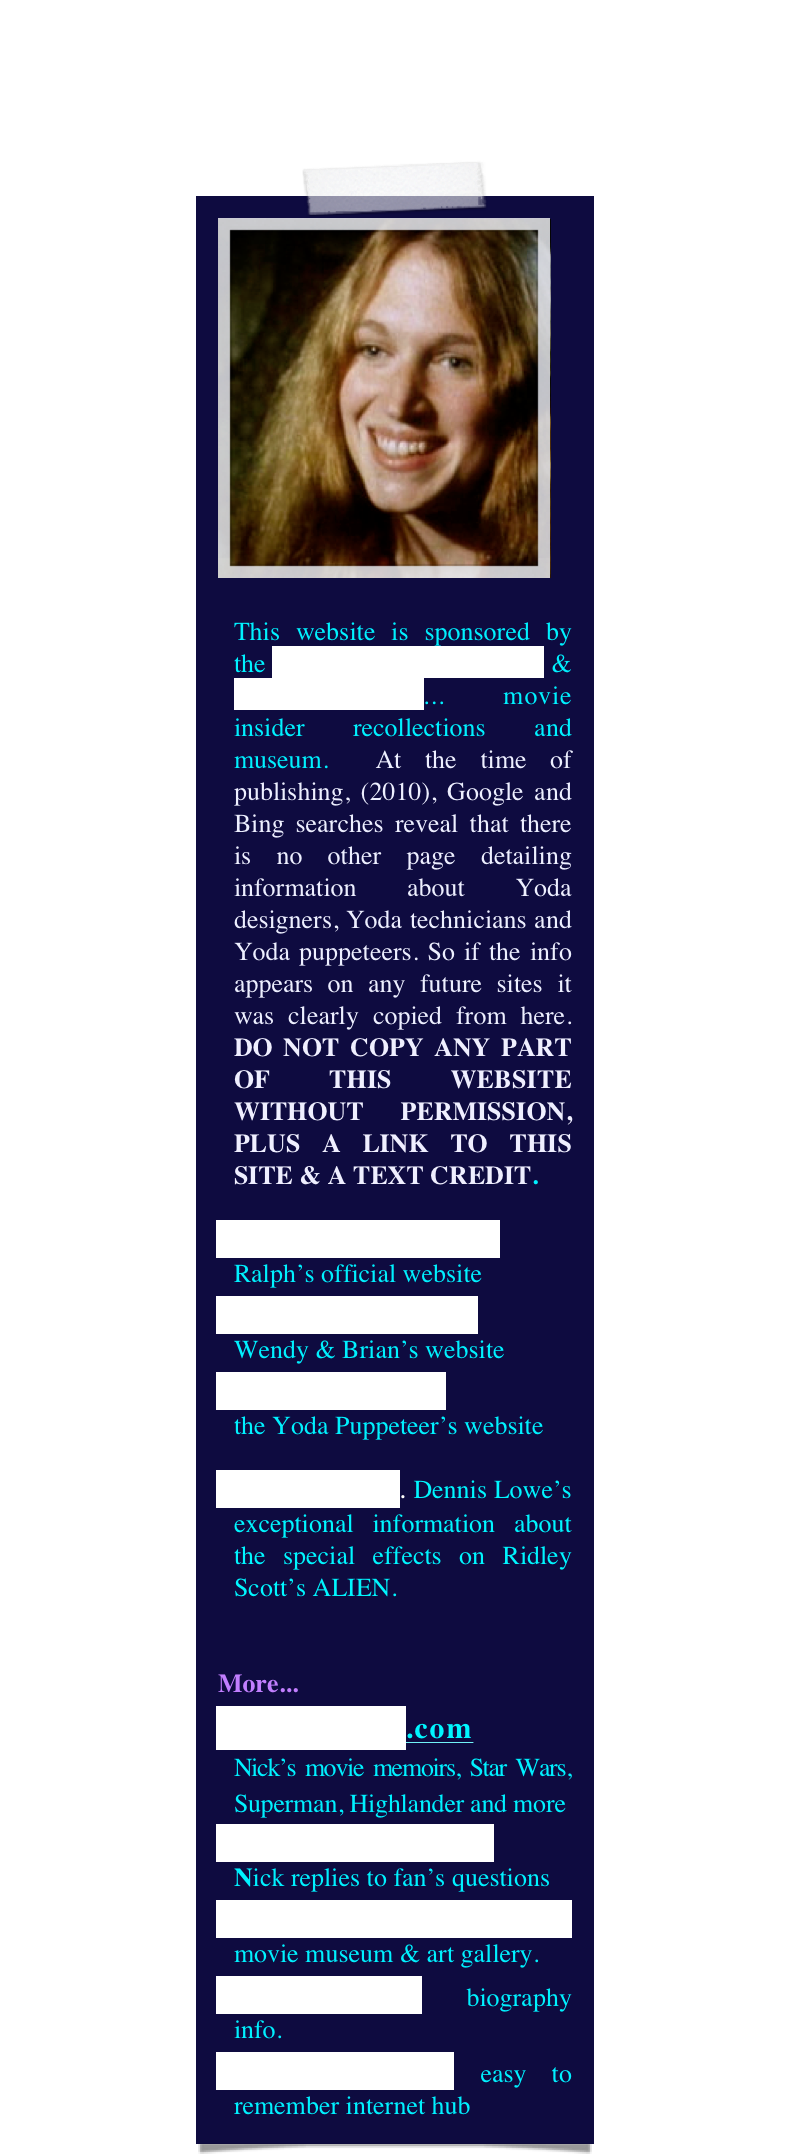 ￼

This website is sponsored by the Yoda Guy Movie Exhibit & CineSecrets.com... movie insider recollections and museum.  At the time of publishing, (2010), Google and Bing searches reveal that there is no other page detailing information about Yoda designers, Yoda technicians and Yoda puppeteers. So if the info appears on any future sites it was clearly copied from here. DO NOT COPY ANY PART OF THIS WEBSITE WITHOUT PERMISSION, PLUS A LINK TO THIS SITE & A TEXT CREDIT.
RalphMcQuarrie.com
Ralph’s official website
The World of Froud
Wendy & Brian’s website
DaveBarclay.com 
the Yoda Puppeteer’s website
Alien Makers. Dennis Lowe’s exceptional information about the special effects on Ridley Scott’s ALIEN.


More...
CineSecrets.com 
Nick’s movie memoirs, Star Wars, Superman, Highlander and more
Questions & Answers   
Nick replies to fan’s questions
YodaGuyMovieExhibit movie museum & art gallery.
NickMaley.com biography info.
thatYodaGuy.com easy to remember internet hub